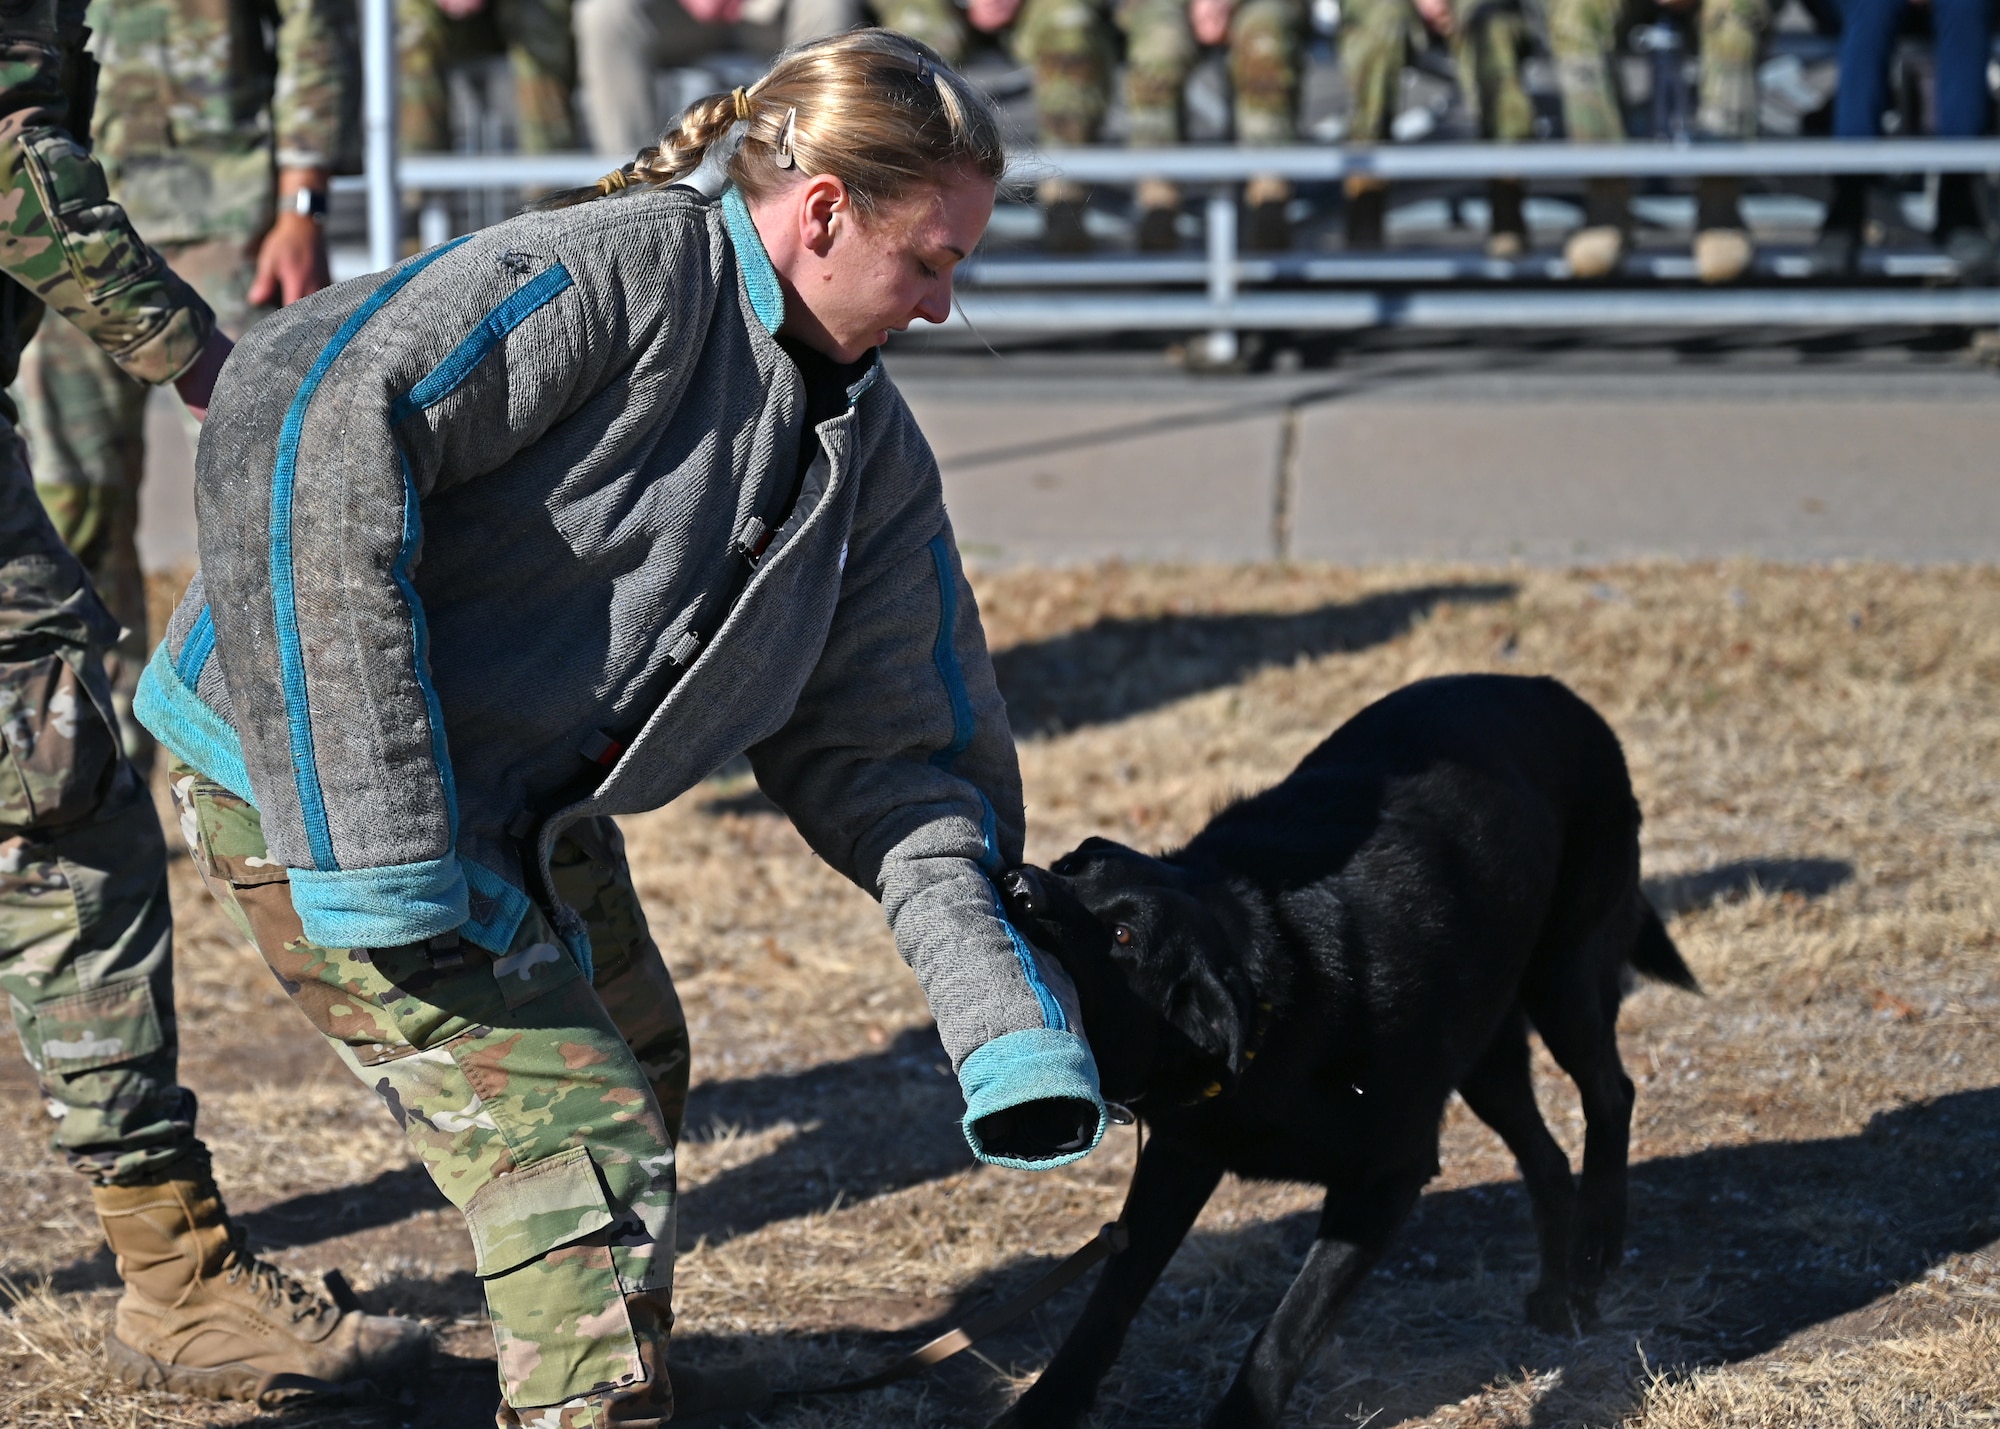 U.S. Air Force Capt. Heather Cooper, Air Force Reserve Officer Training Corps Detachment 805 assistant director of staff, participates in a military working dog demonstration at the Goodfellow Air Force Base, Texas, parade field Feb. 18, 2022. The cadets visited the base and were given the opportunity to speak with officers from communications, intelligence and security forces. (U.S. Air Force photo by Senior Airman Ethan Sherwood)